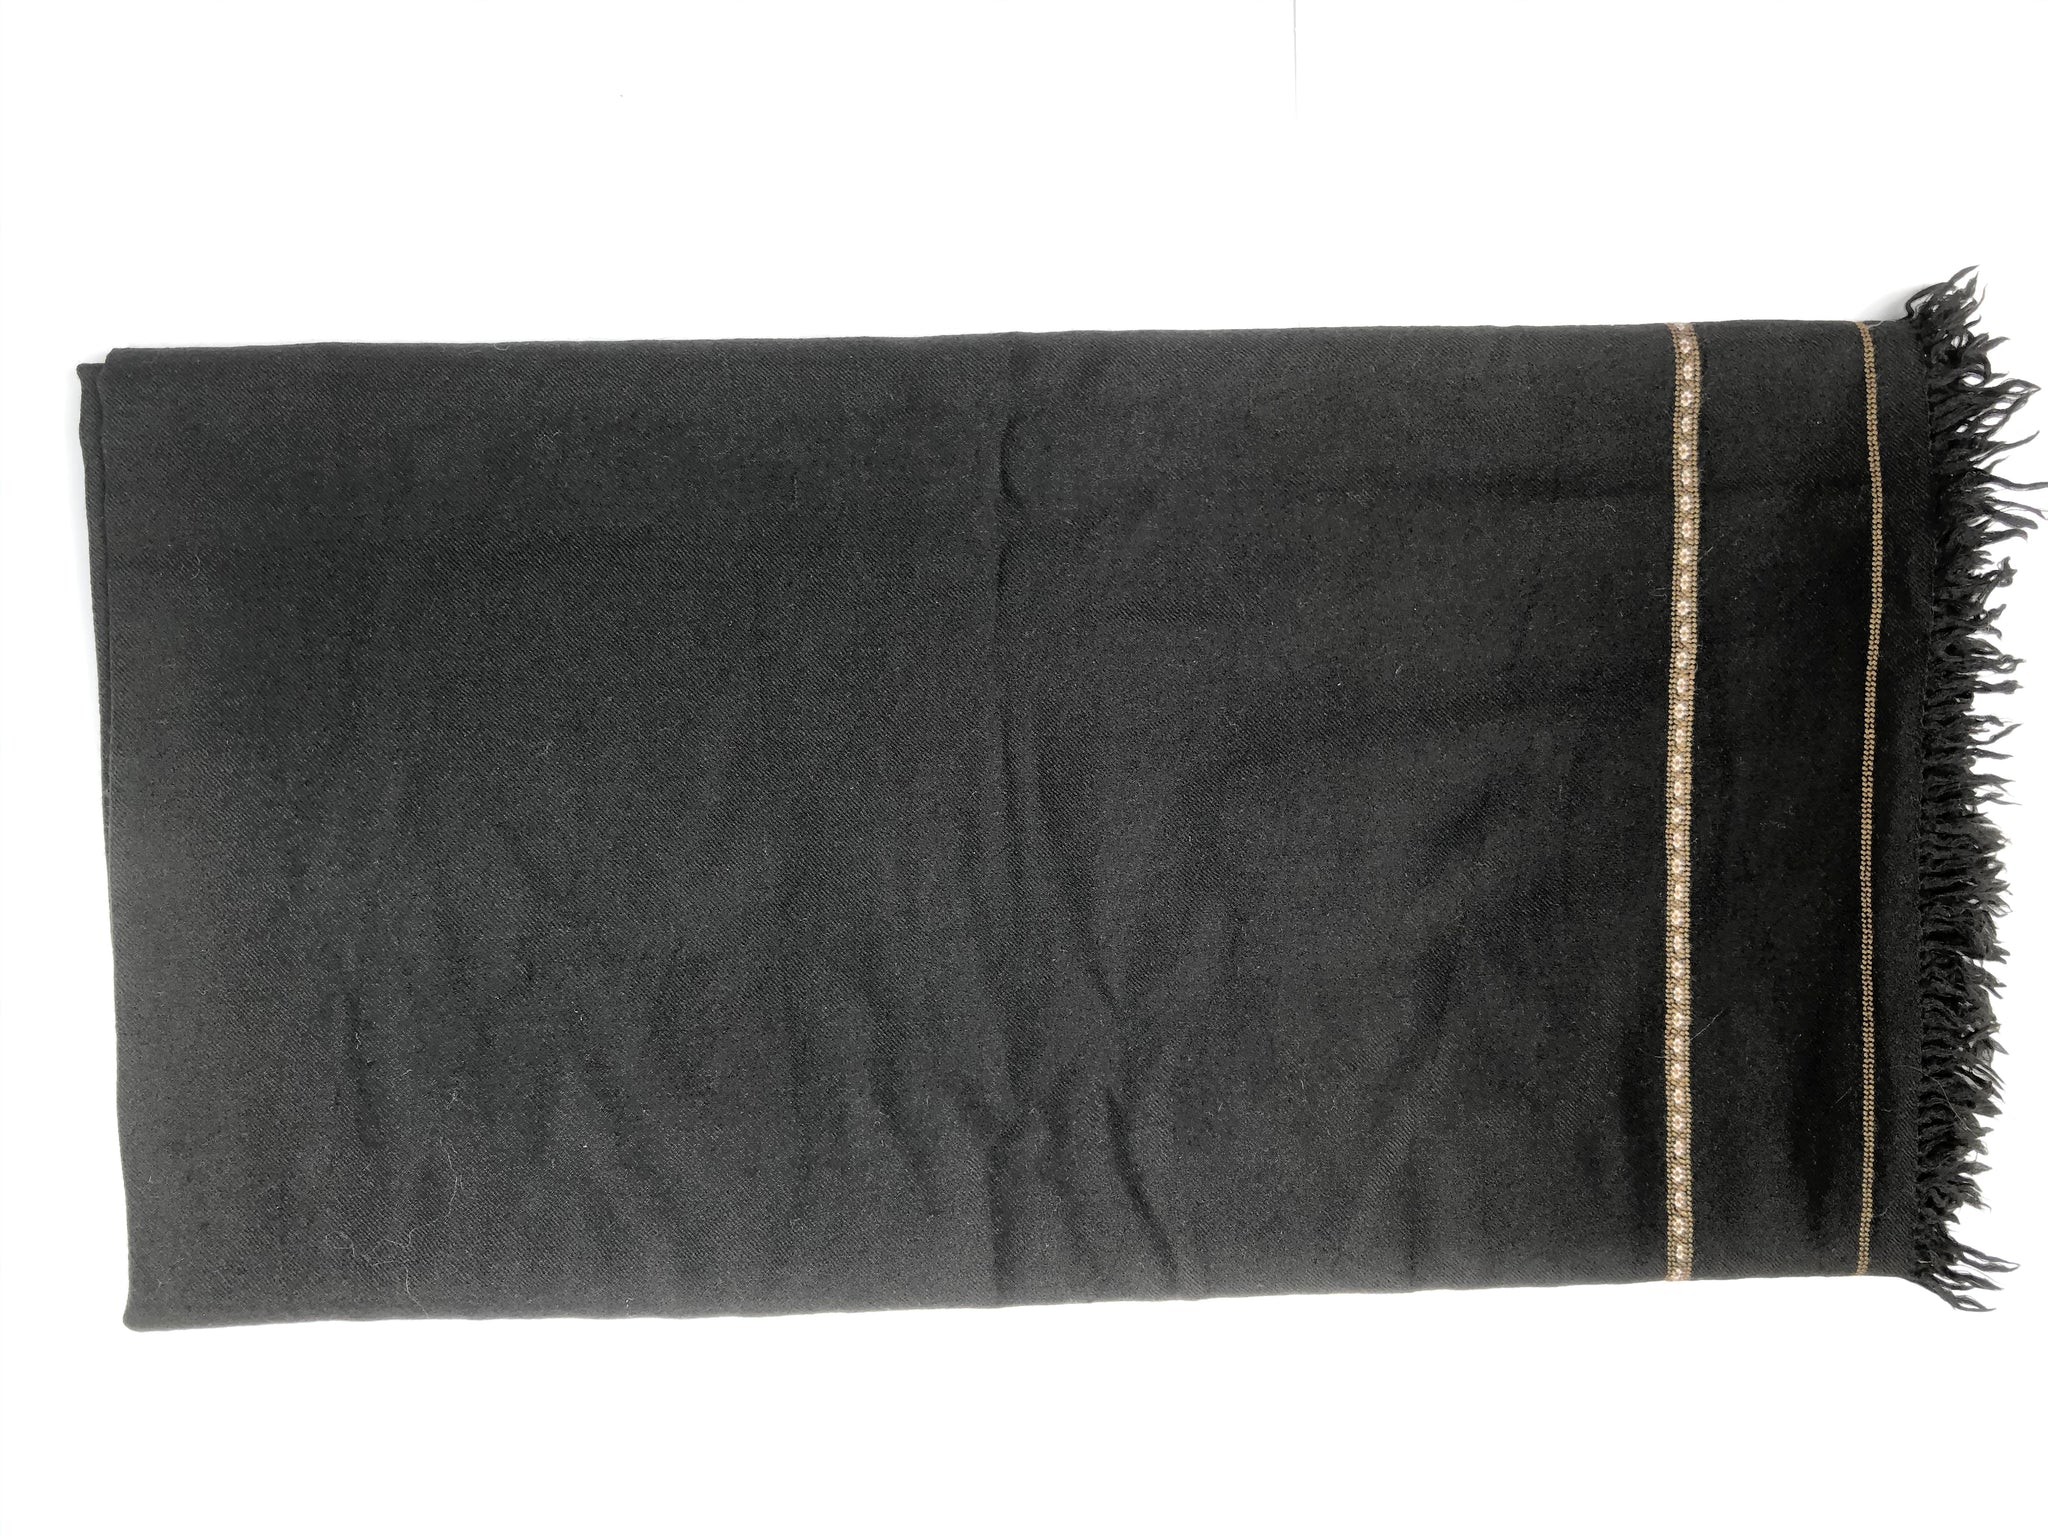 Patoo Shawl, Hand-woven,with Embroidered Borders Black Color - Afghan Gifts Shop